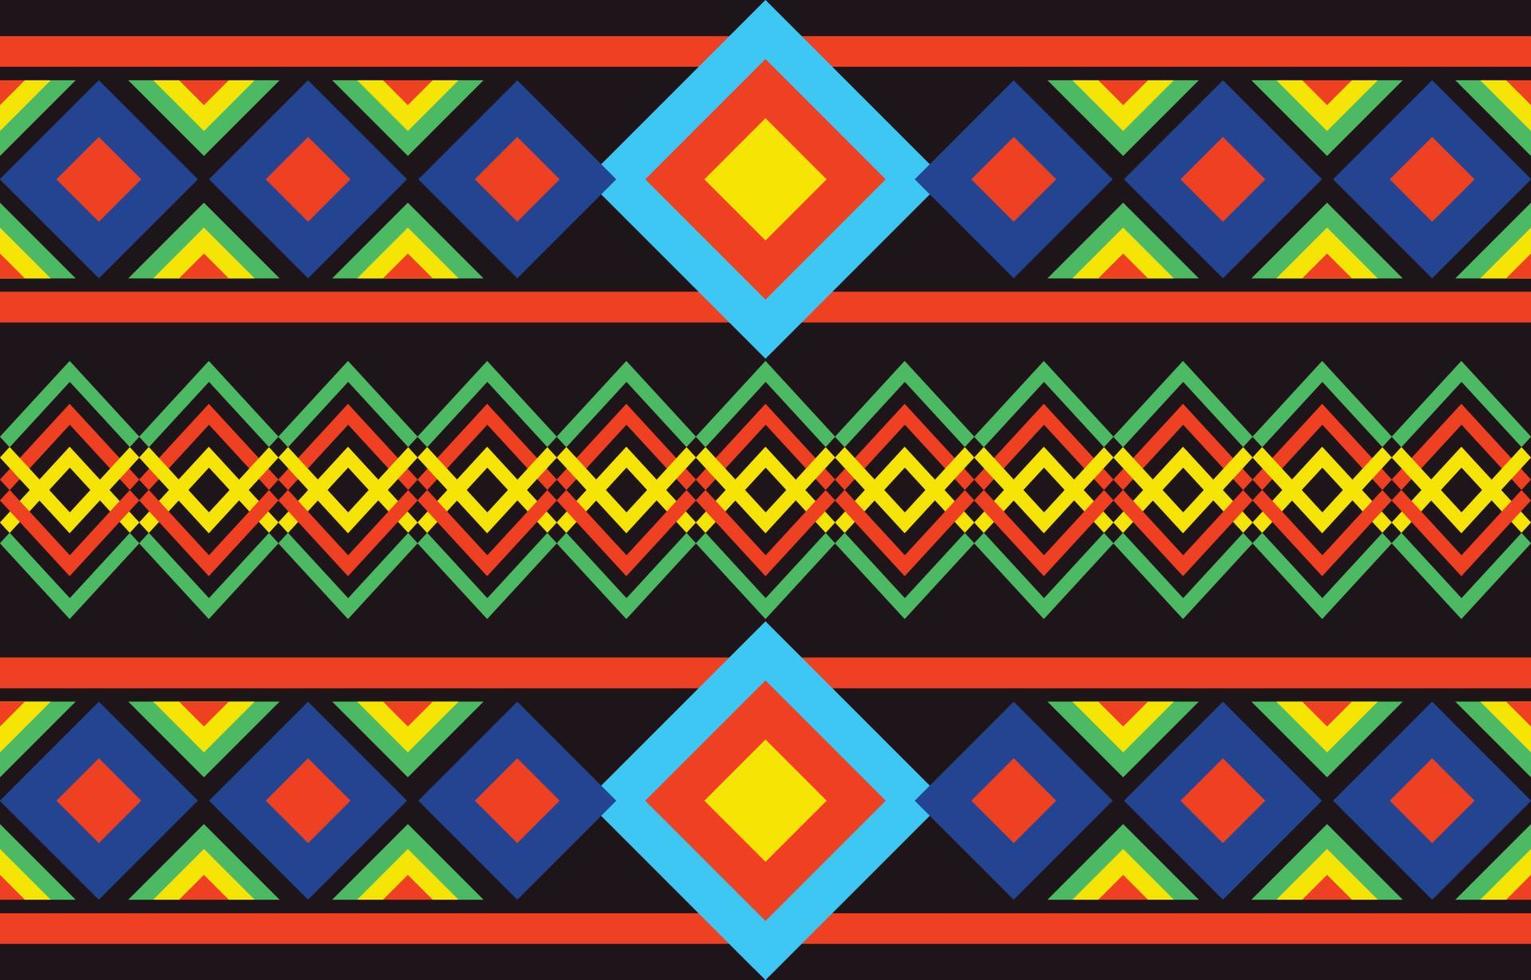 Fabric seamless pattern geometric tribal ethnic traditional background,native American Design Elements, Design for carpet,wallpaper,clothing,wrapping,rug,interior,Vector illustration embroidery. vector